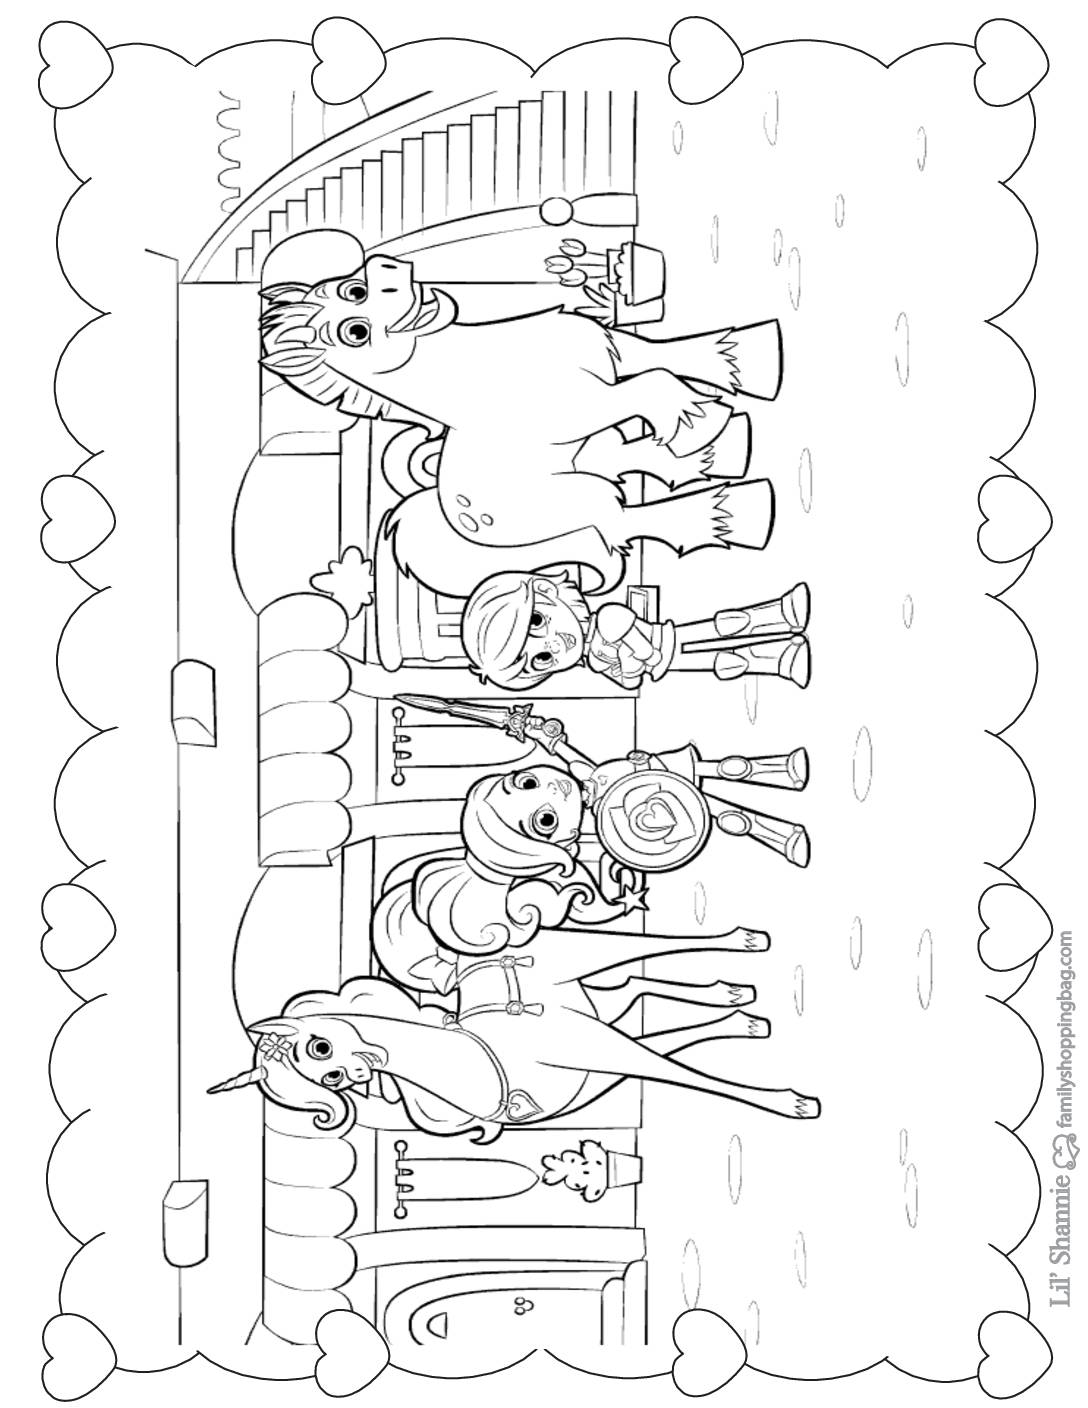 62 Classroom Objects Coloring Pages Pdf  Latest HD